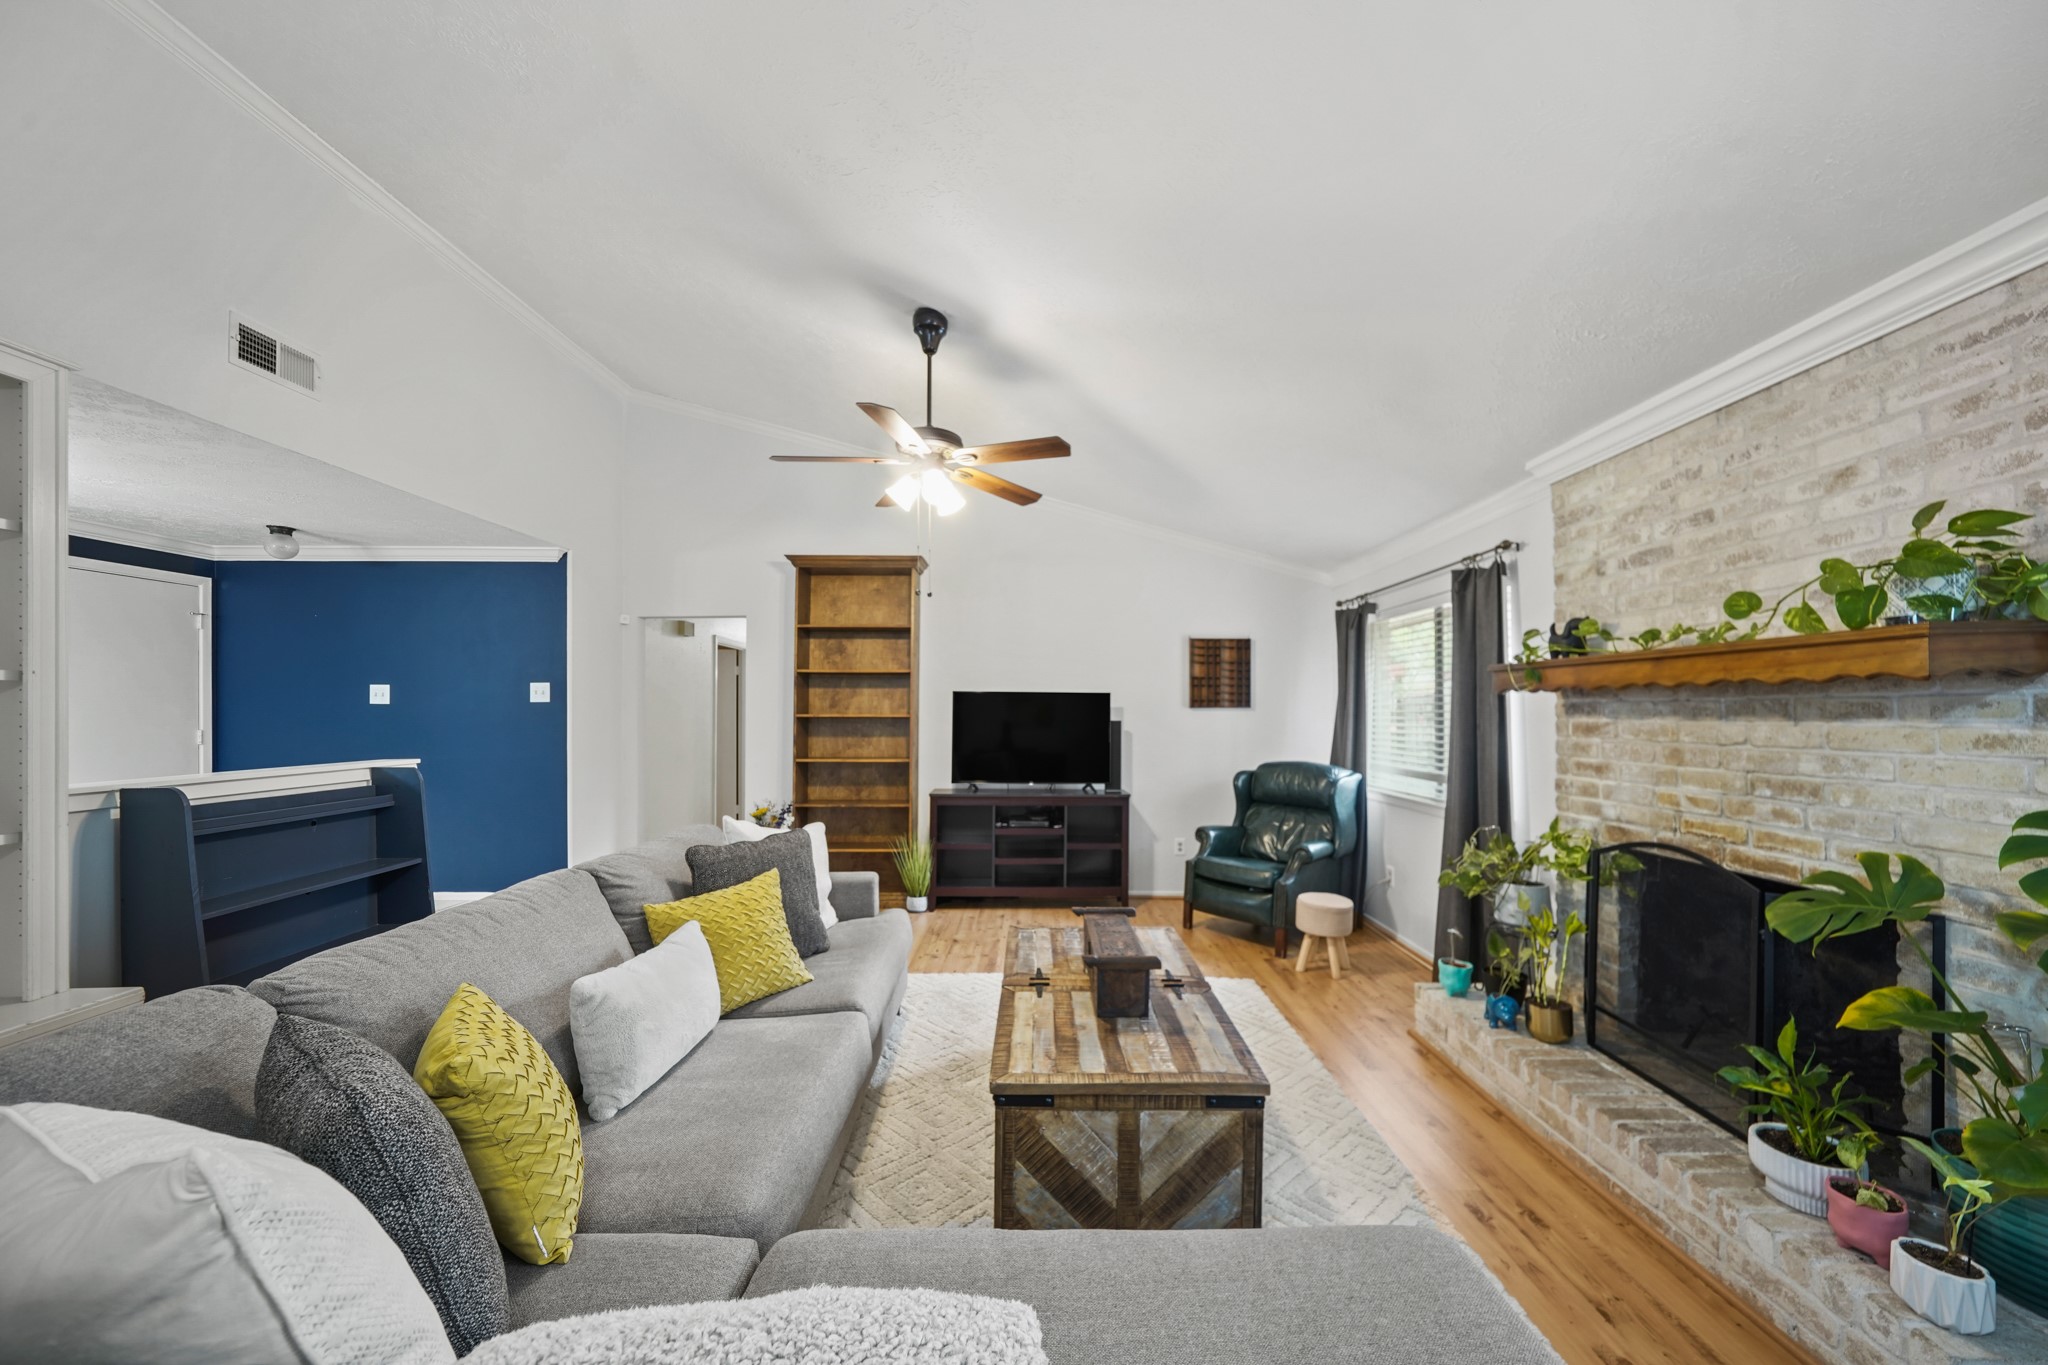 This lovely family room is a great space to gather and visit with your friends and family or enjoy a quiet, peaceful evening at home with your favorite person.